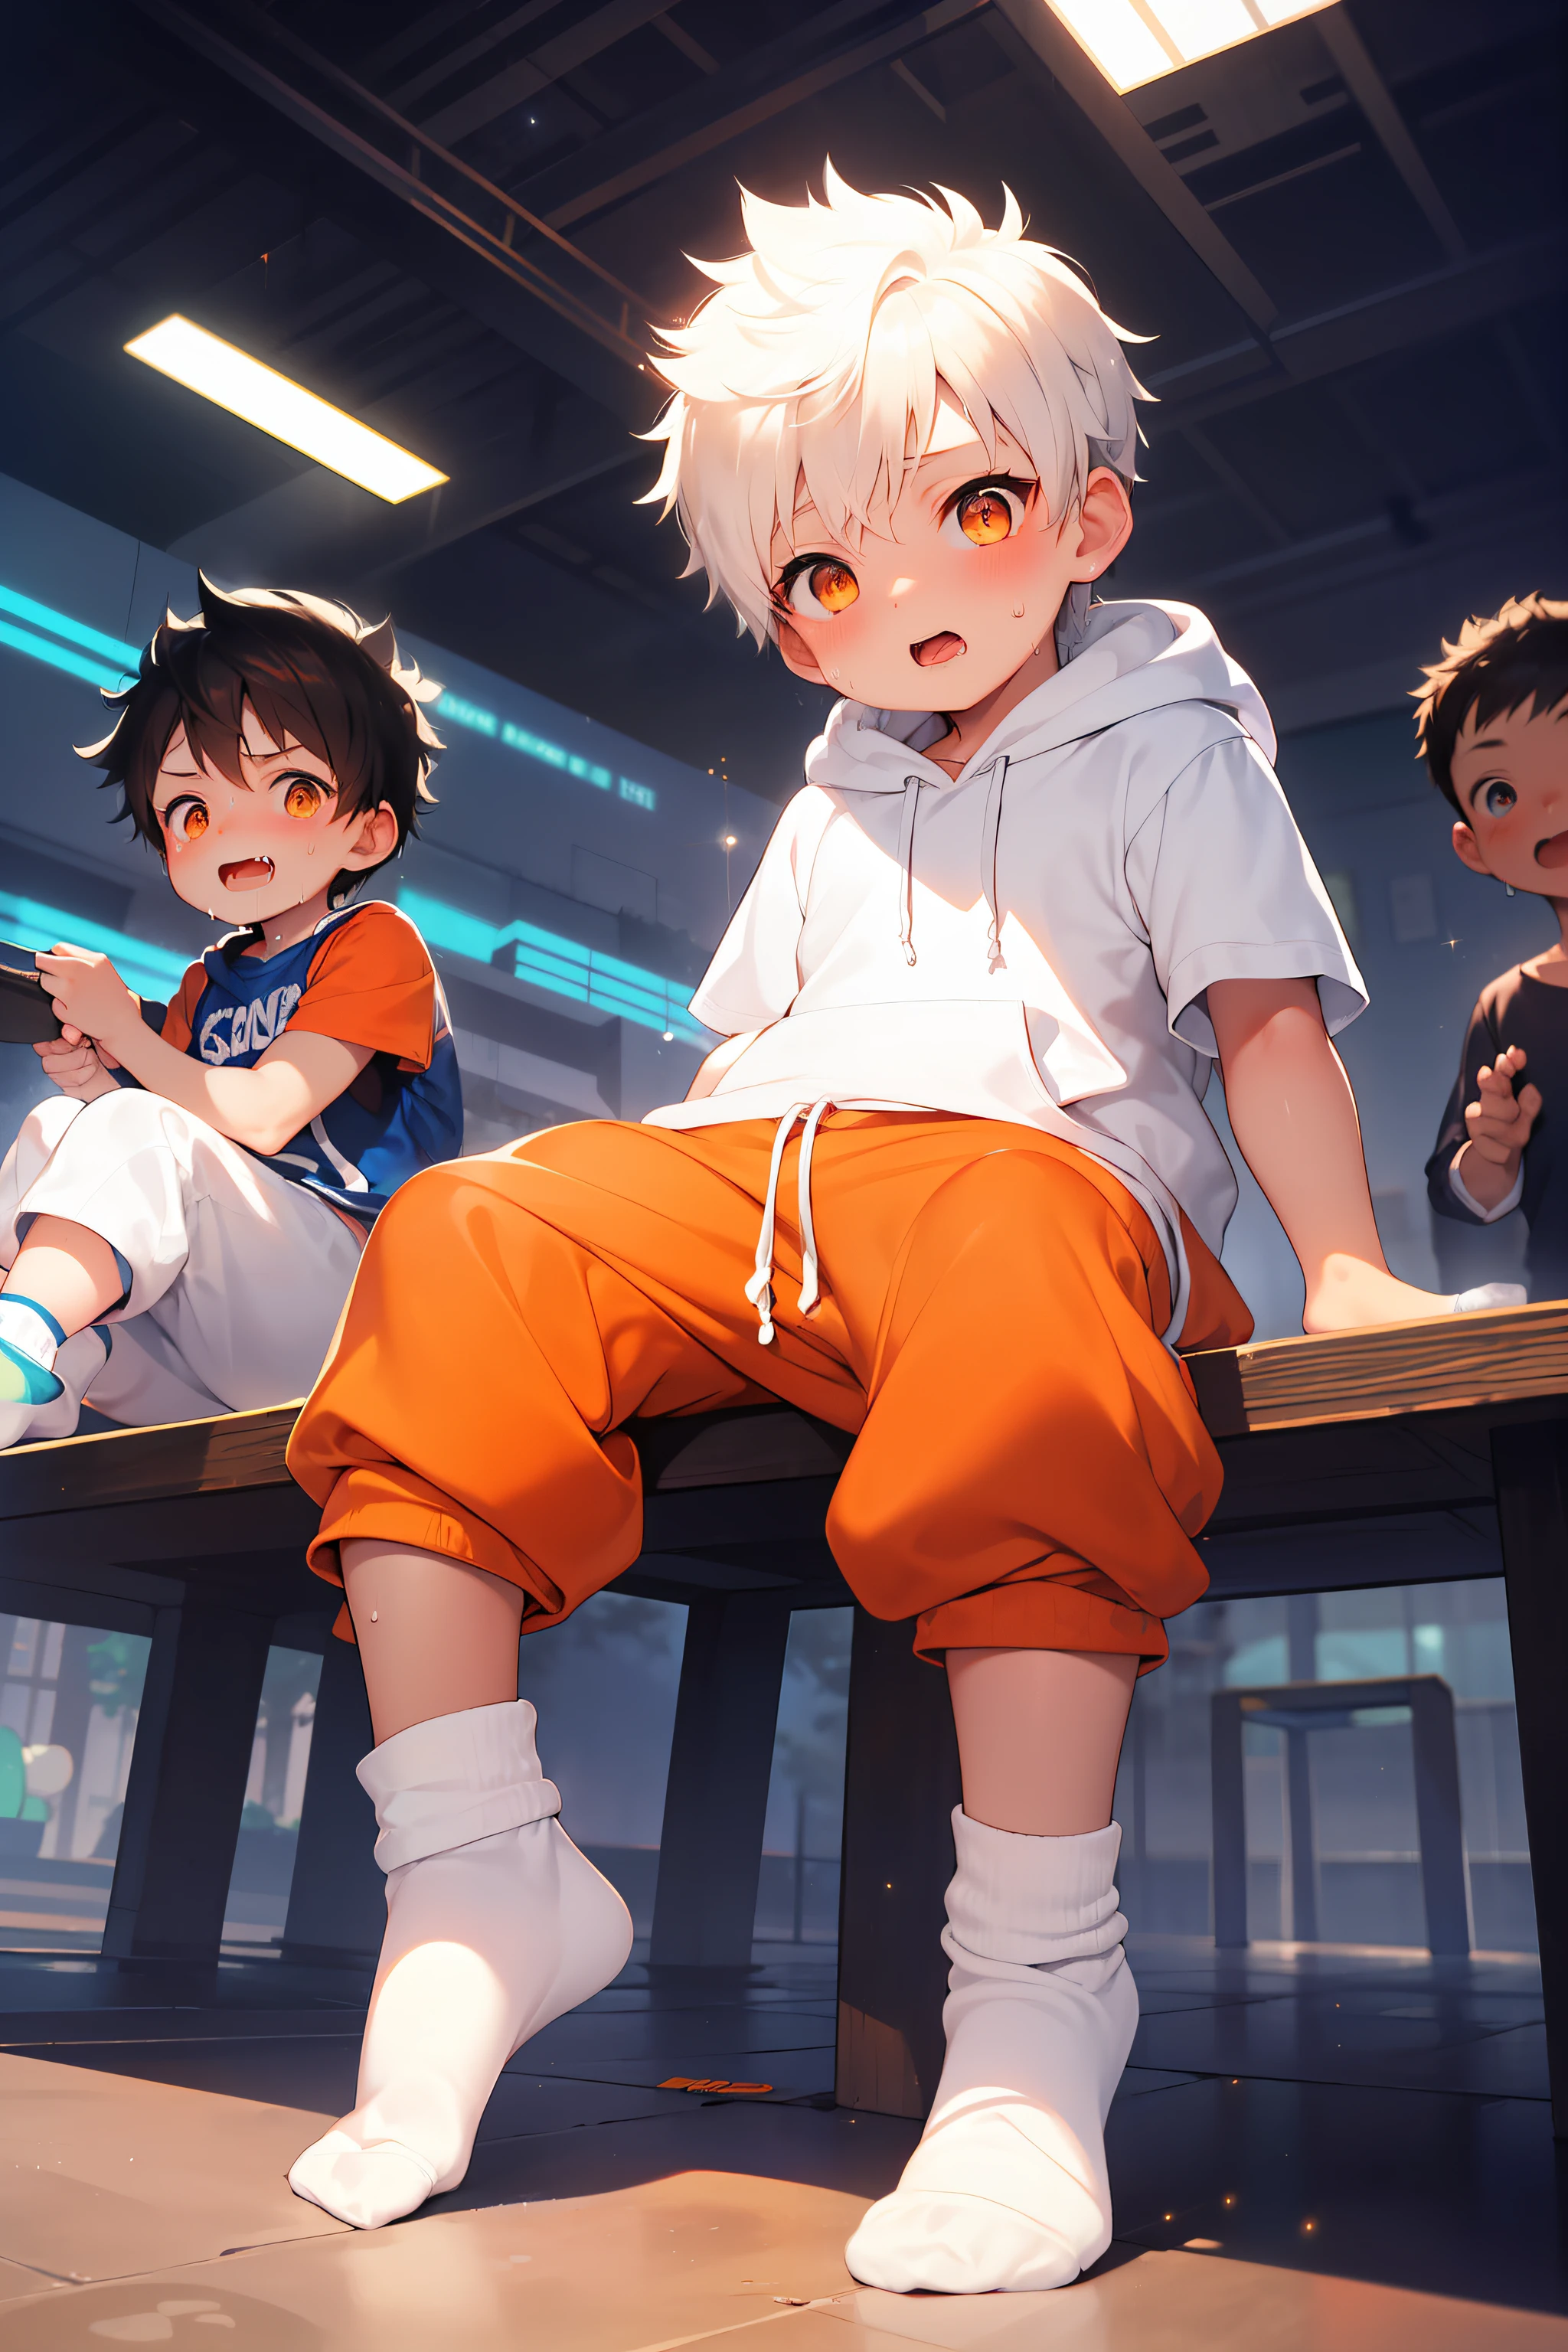 2 chubby Little 男の子s with White hair and shiny orange eyes and colorful 靴下 wearing a hoodie, and oversized スウェットパンツ sitting on a field, 赤面する, よだれを垂らす, 若い, 男の子, , 小さい, 幼児, 空から落ちる輝き, 夜, 暗い, やわらかい光, (スウェットパンツ:1.4), (靴下:1.4),